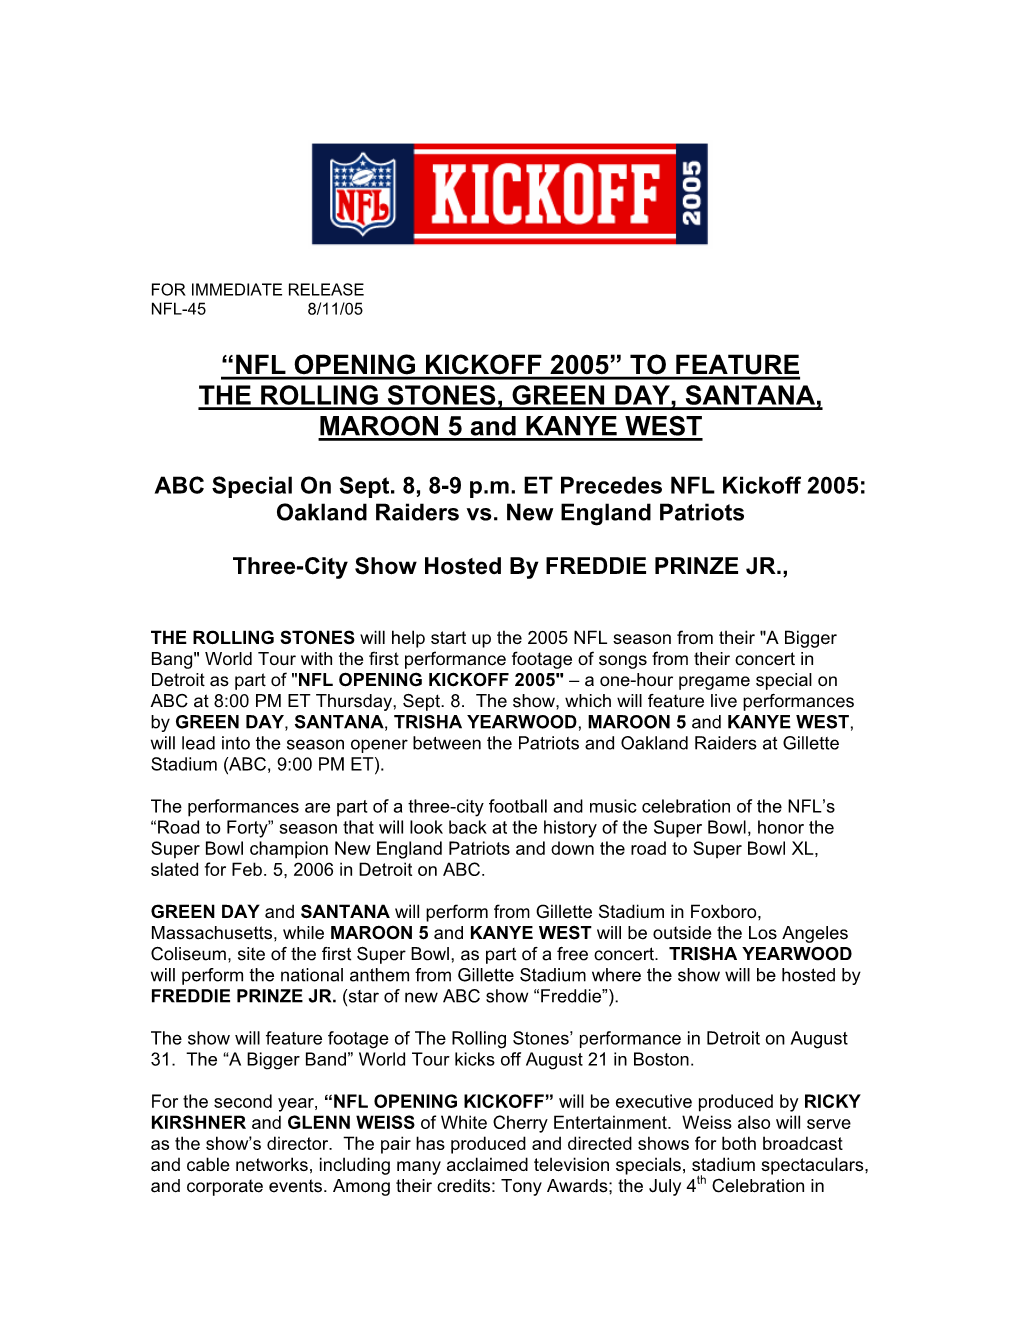 “NFL OPENING KICKOFF 2005” to FEATURE the ROLLING STONES, GREEN DAY, SANTANA, MAROON 5 and KANYE WEST